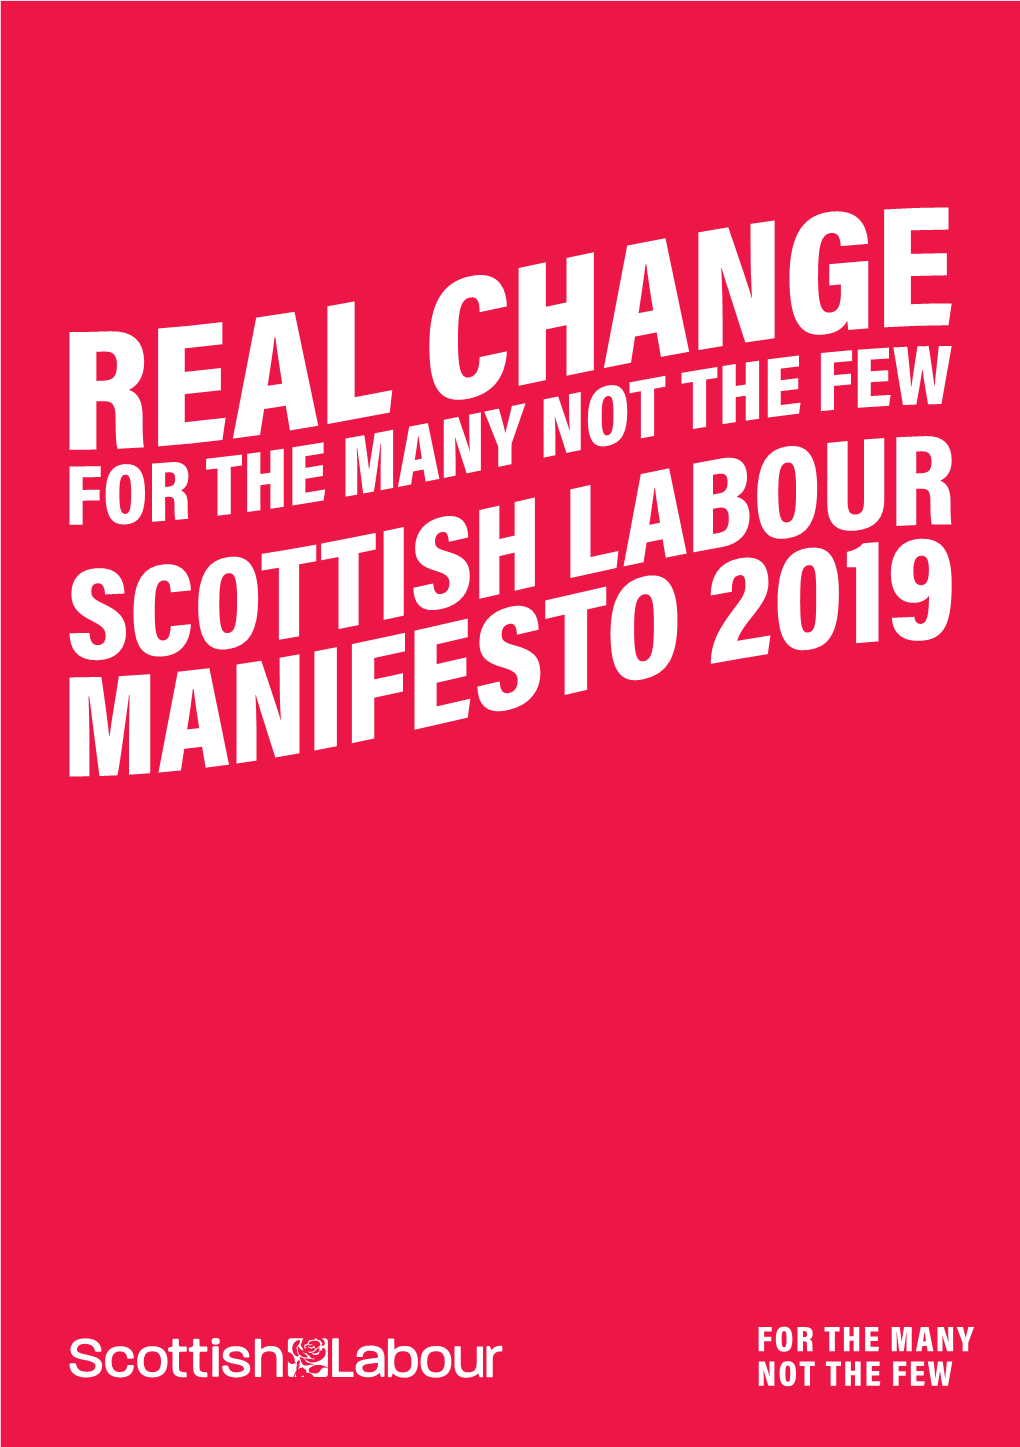 Real Change for the Many Not the Few the Scottish Labou